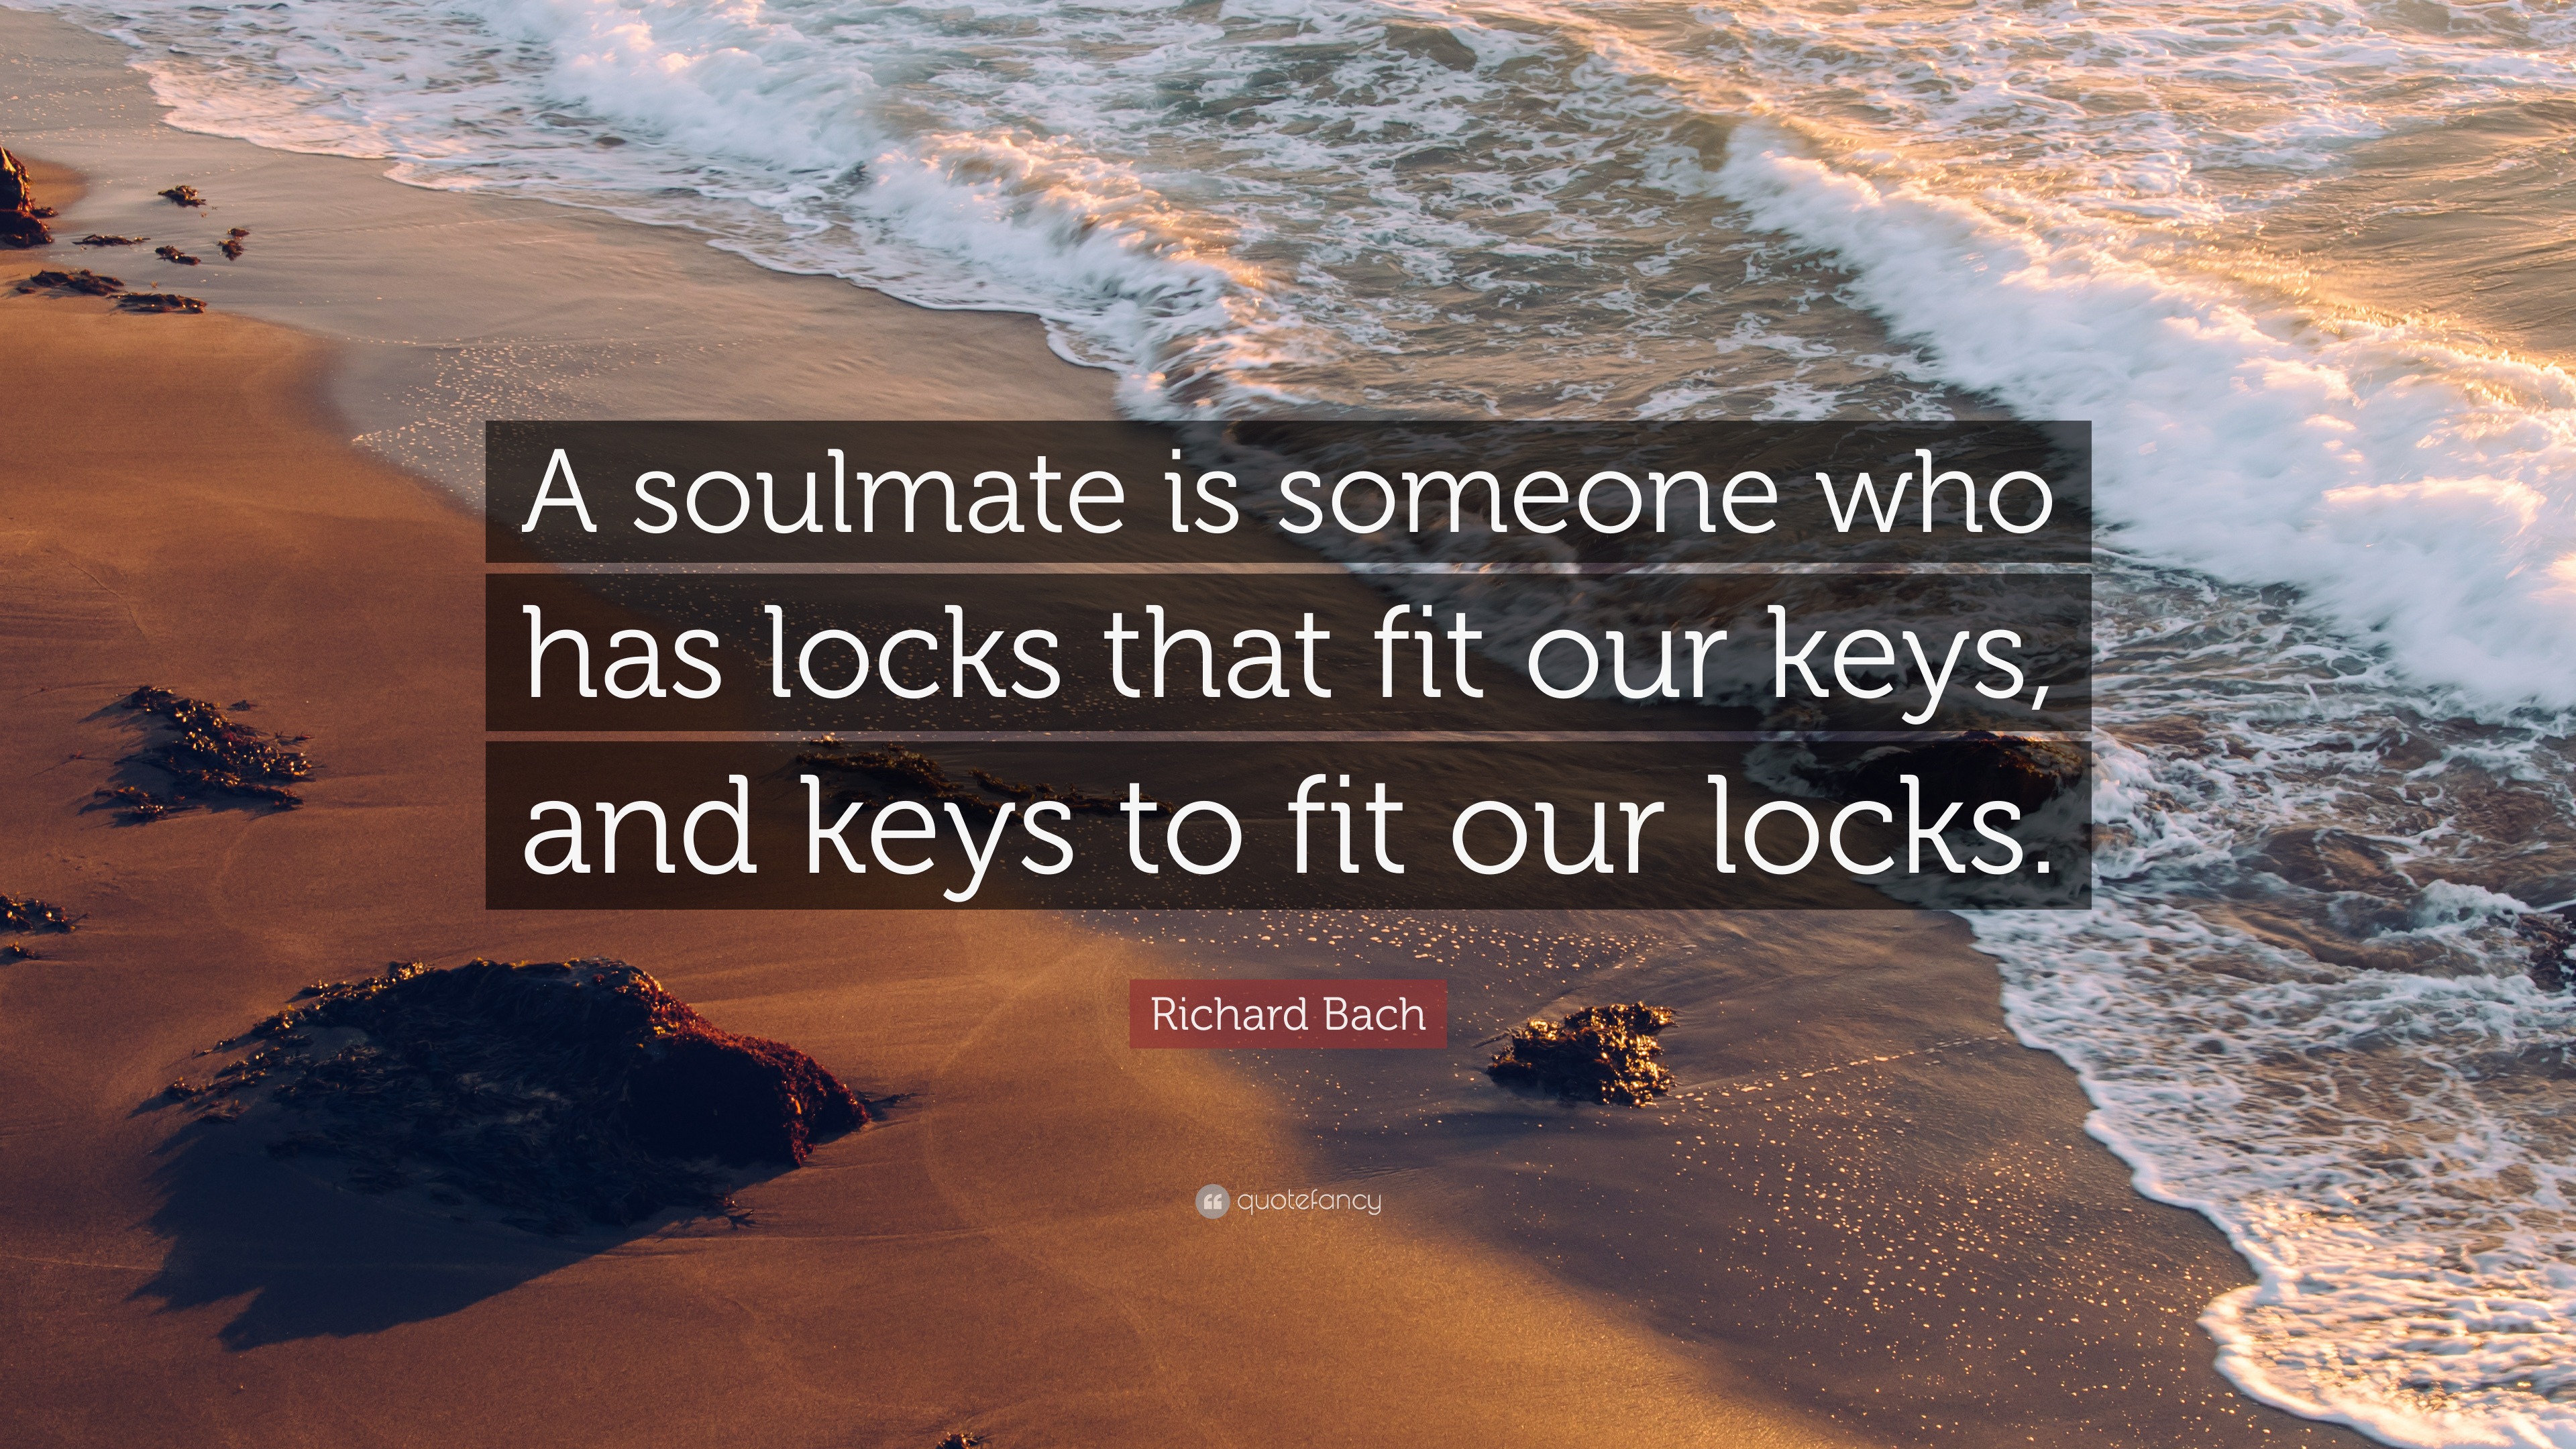 Richard Bach Quote: "A soulmate is someone who has locks that fit our ...